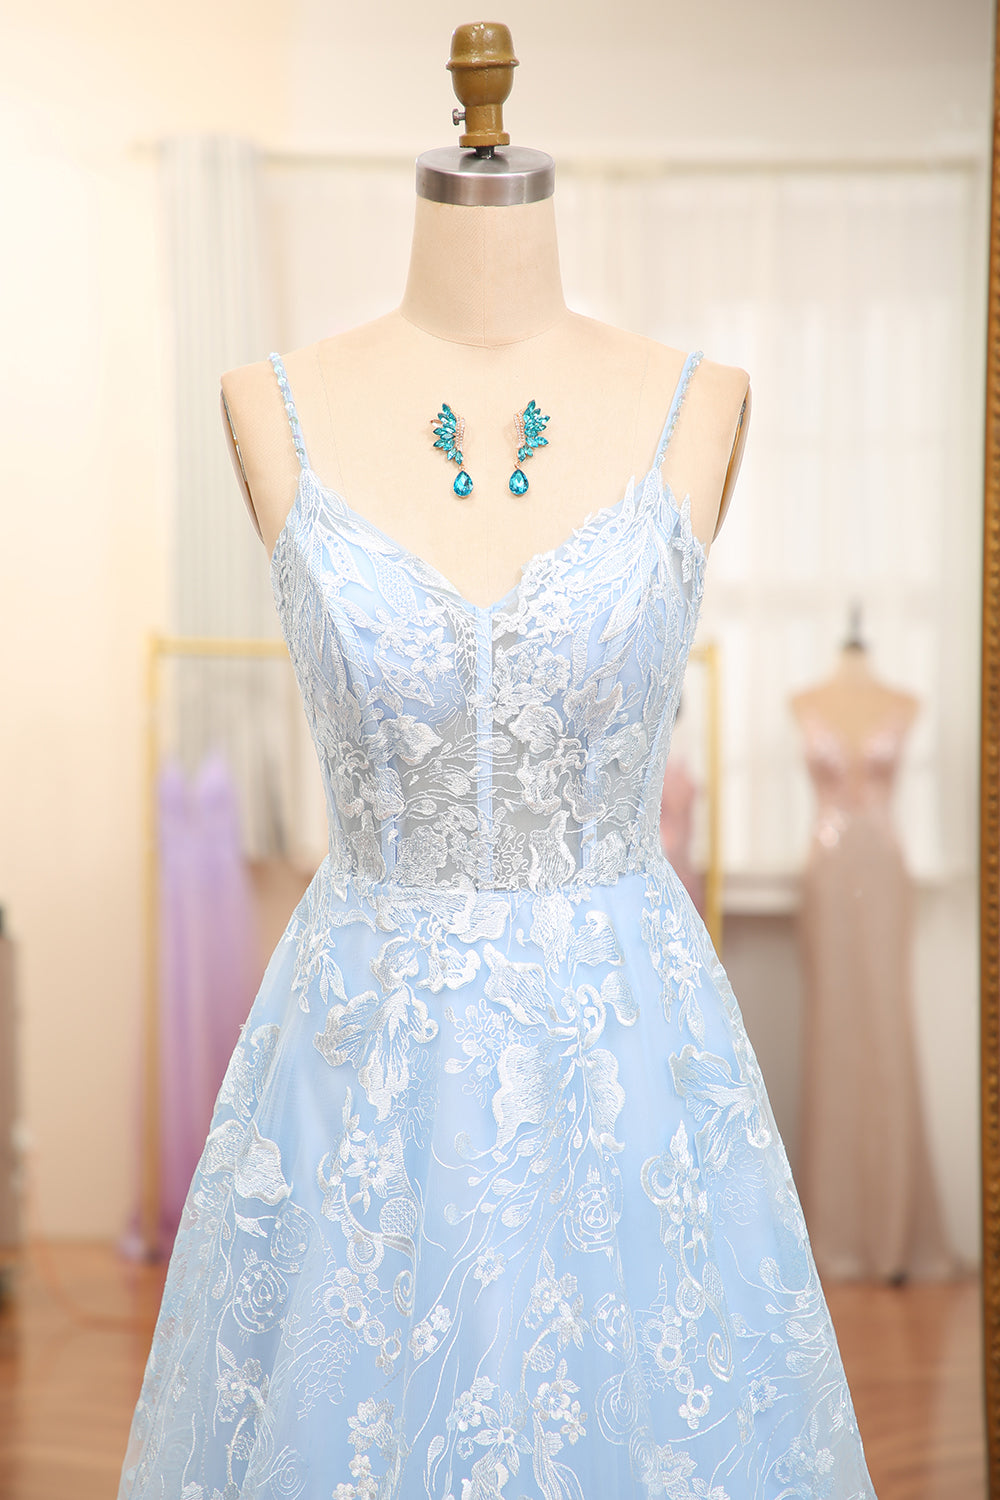 Sky Blue A Line Spaghetti Straps V Neck Tulle Long Corset Prom Dress With Appliques